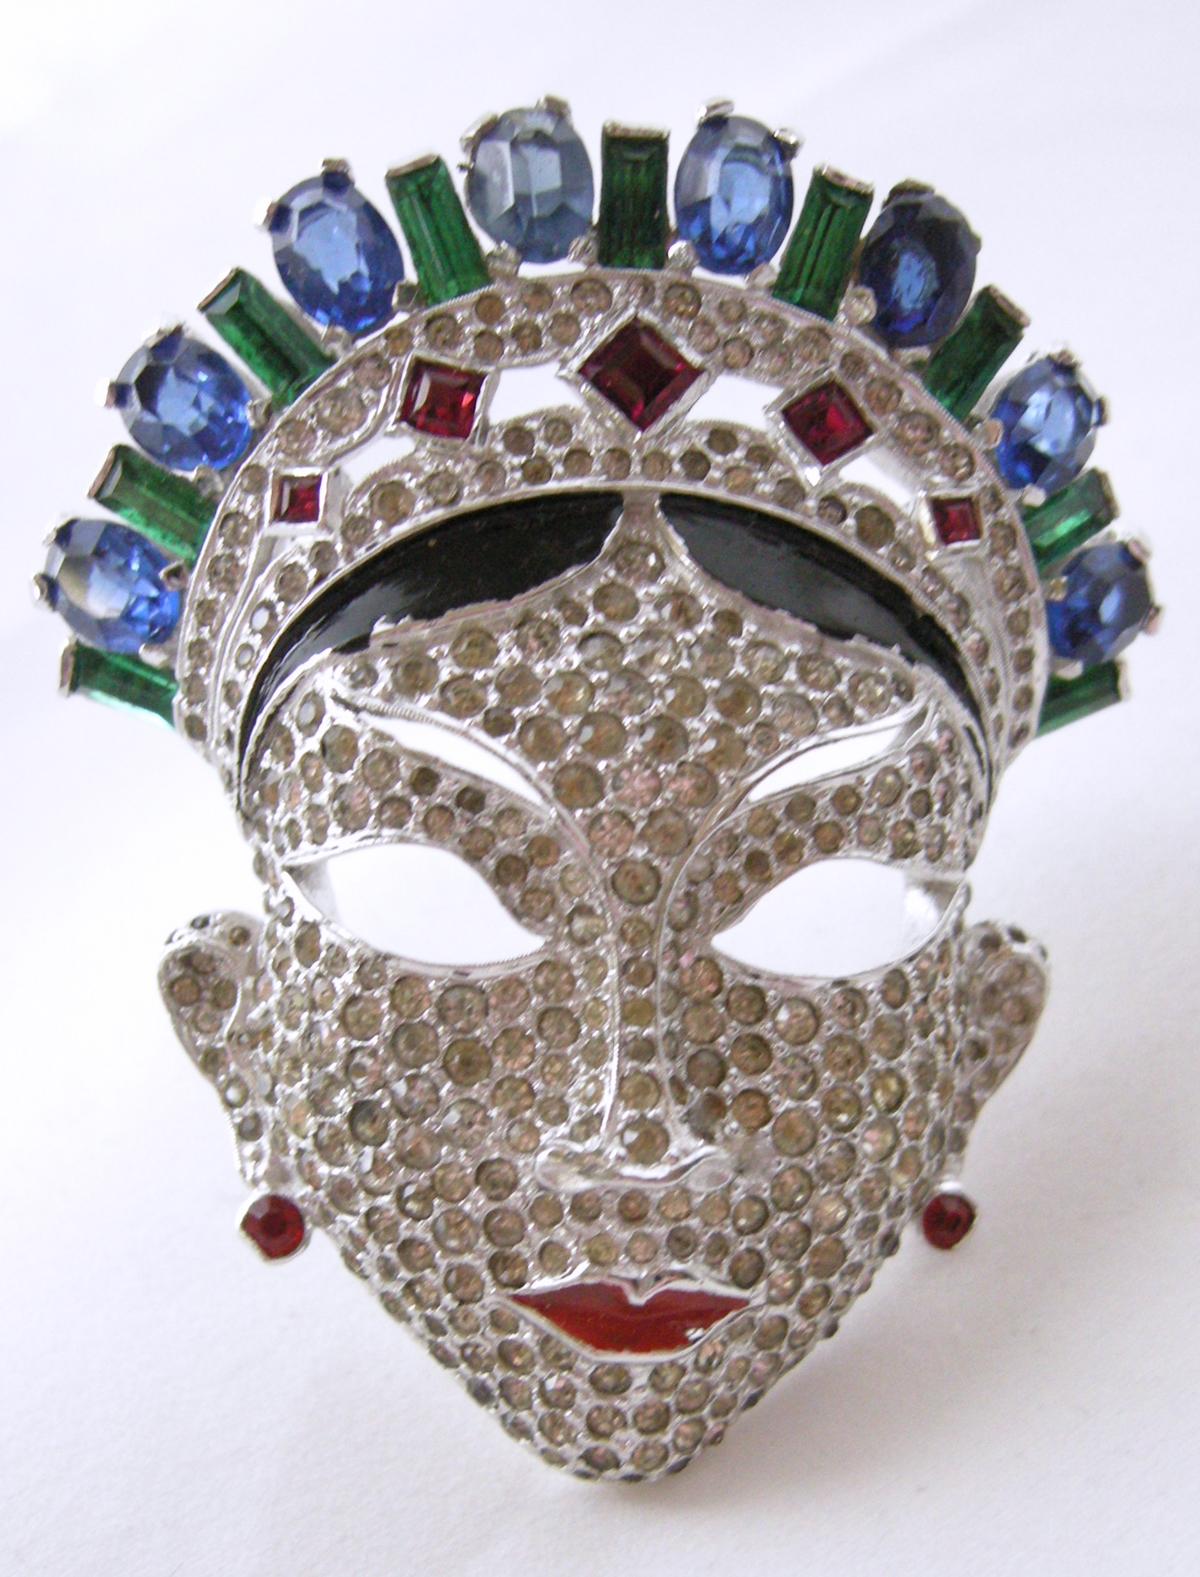 This is the famous original Mazer masked woman crystal face that is in the jewelry books.  Her crown has green and blue crystals.  Below are faux ruby crystals that are encrusted with crystals.  Black enamel separated the crown from the face.  The